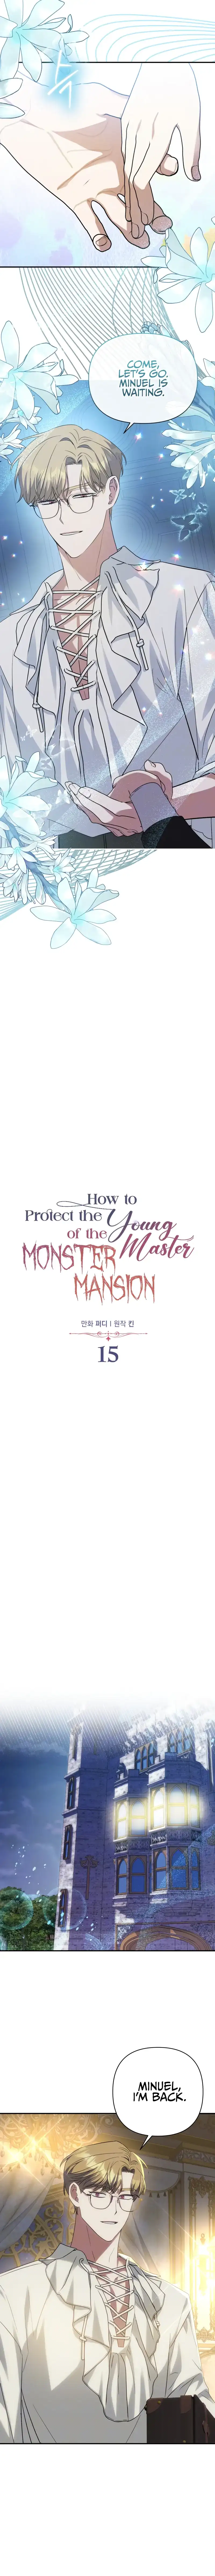 How to Protect the Master of the Monster Mansion Chapter 15 - page 4